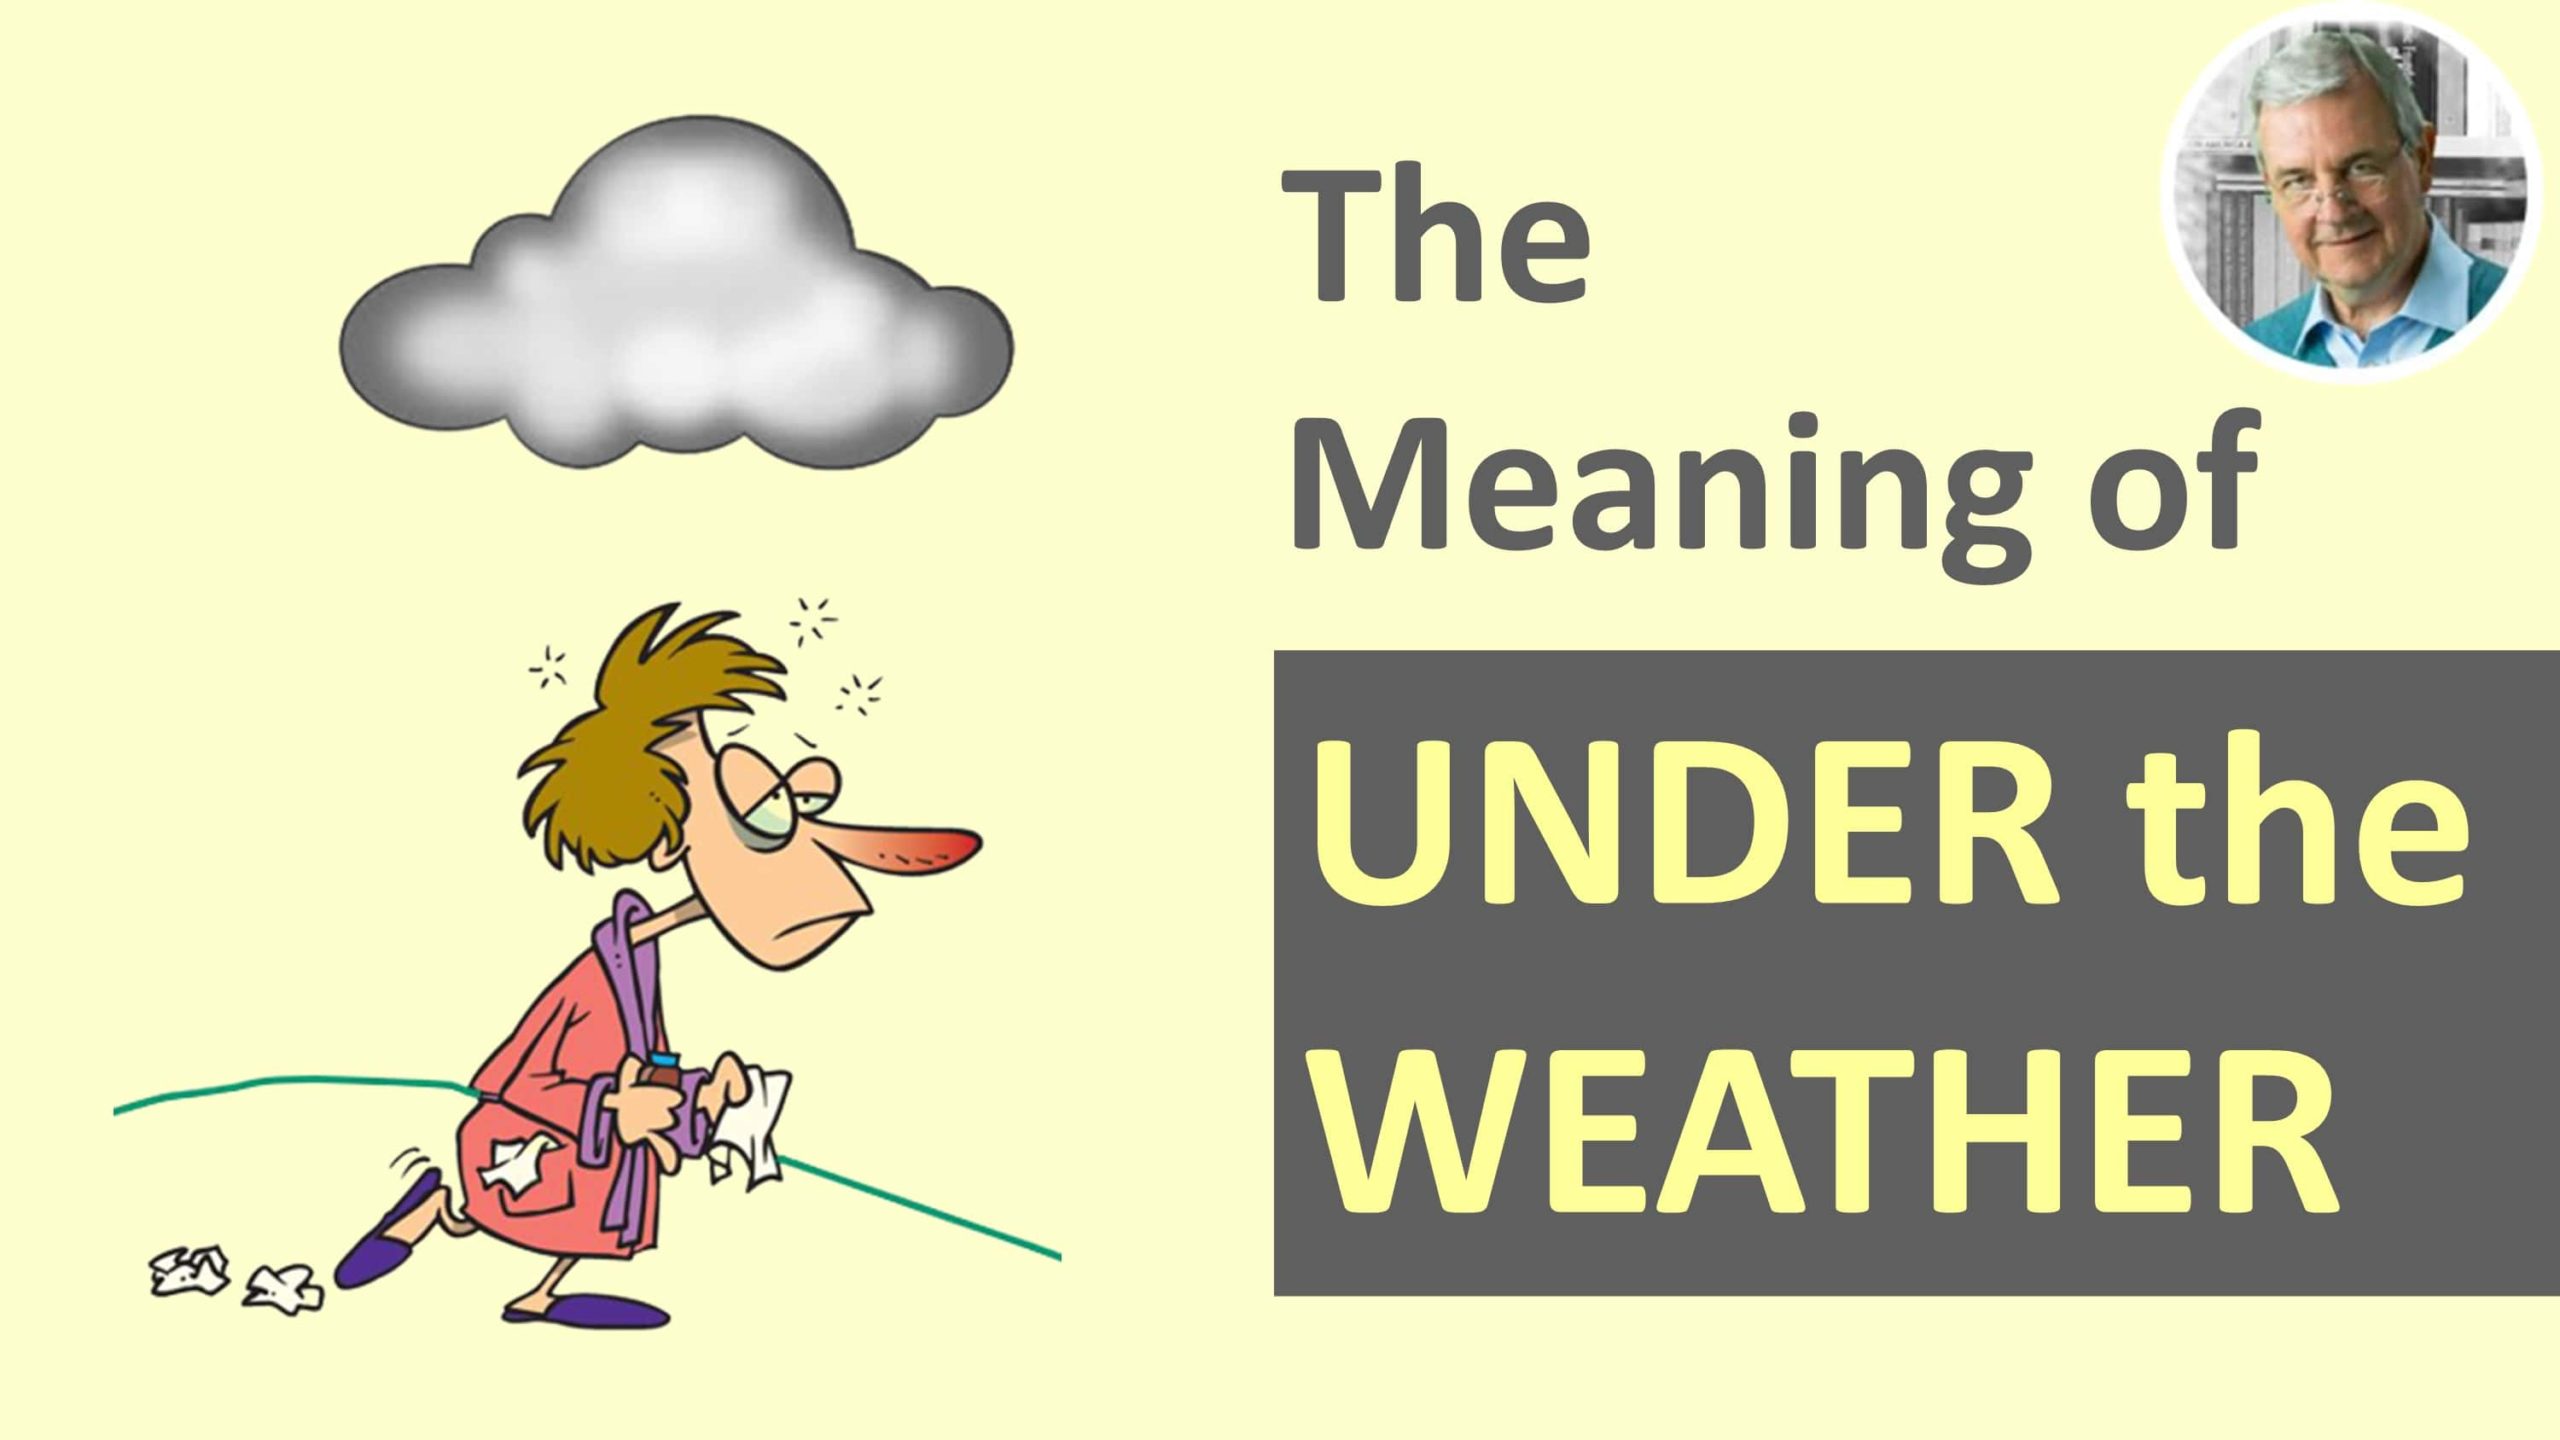 under the weather - meaning